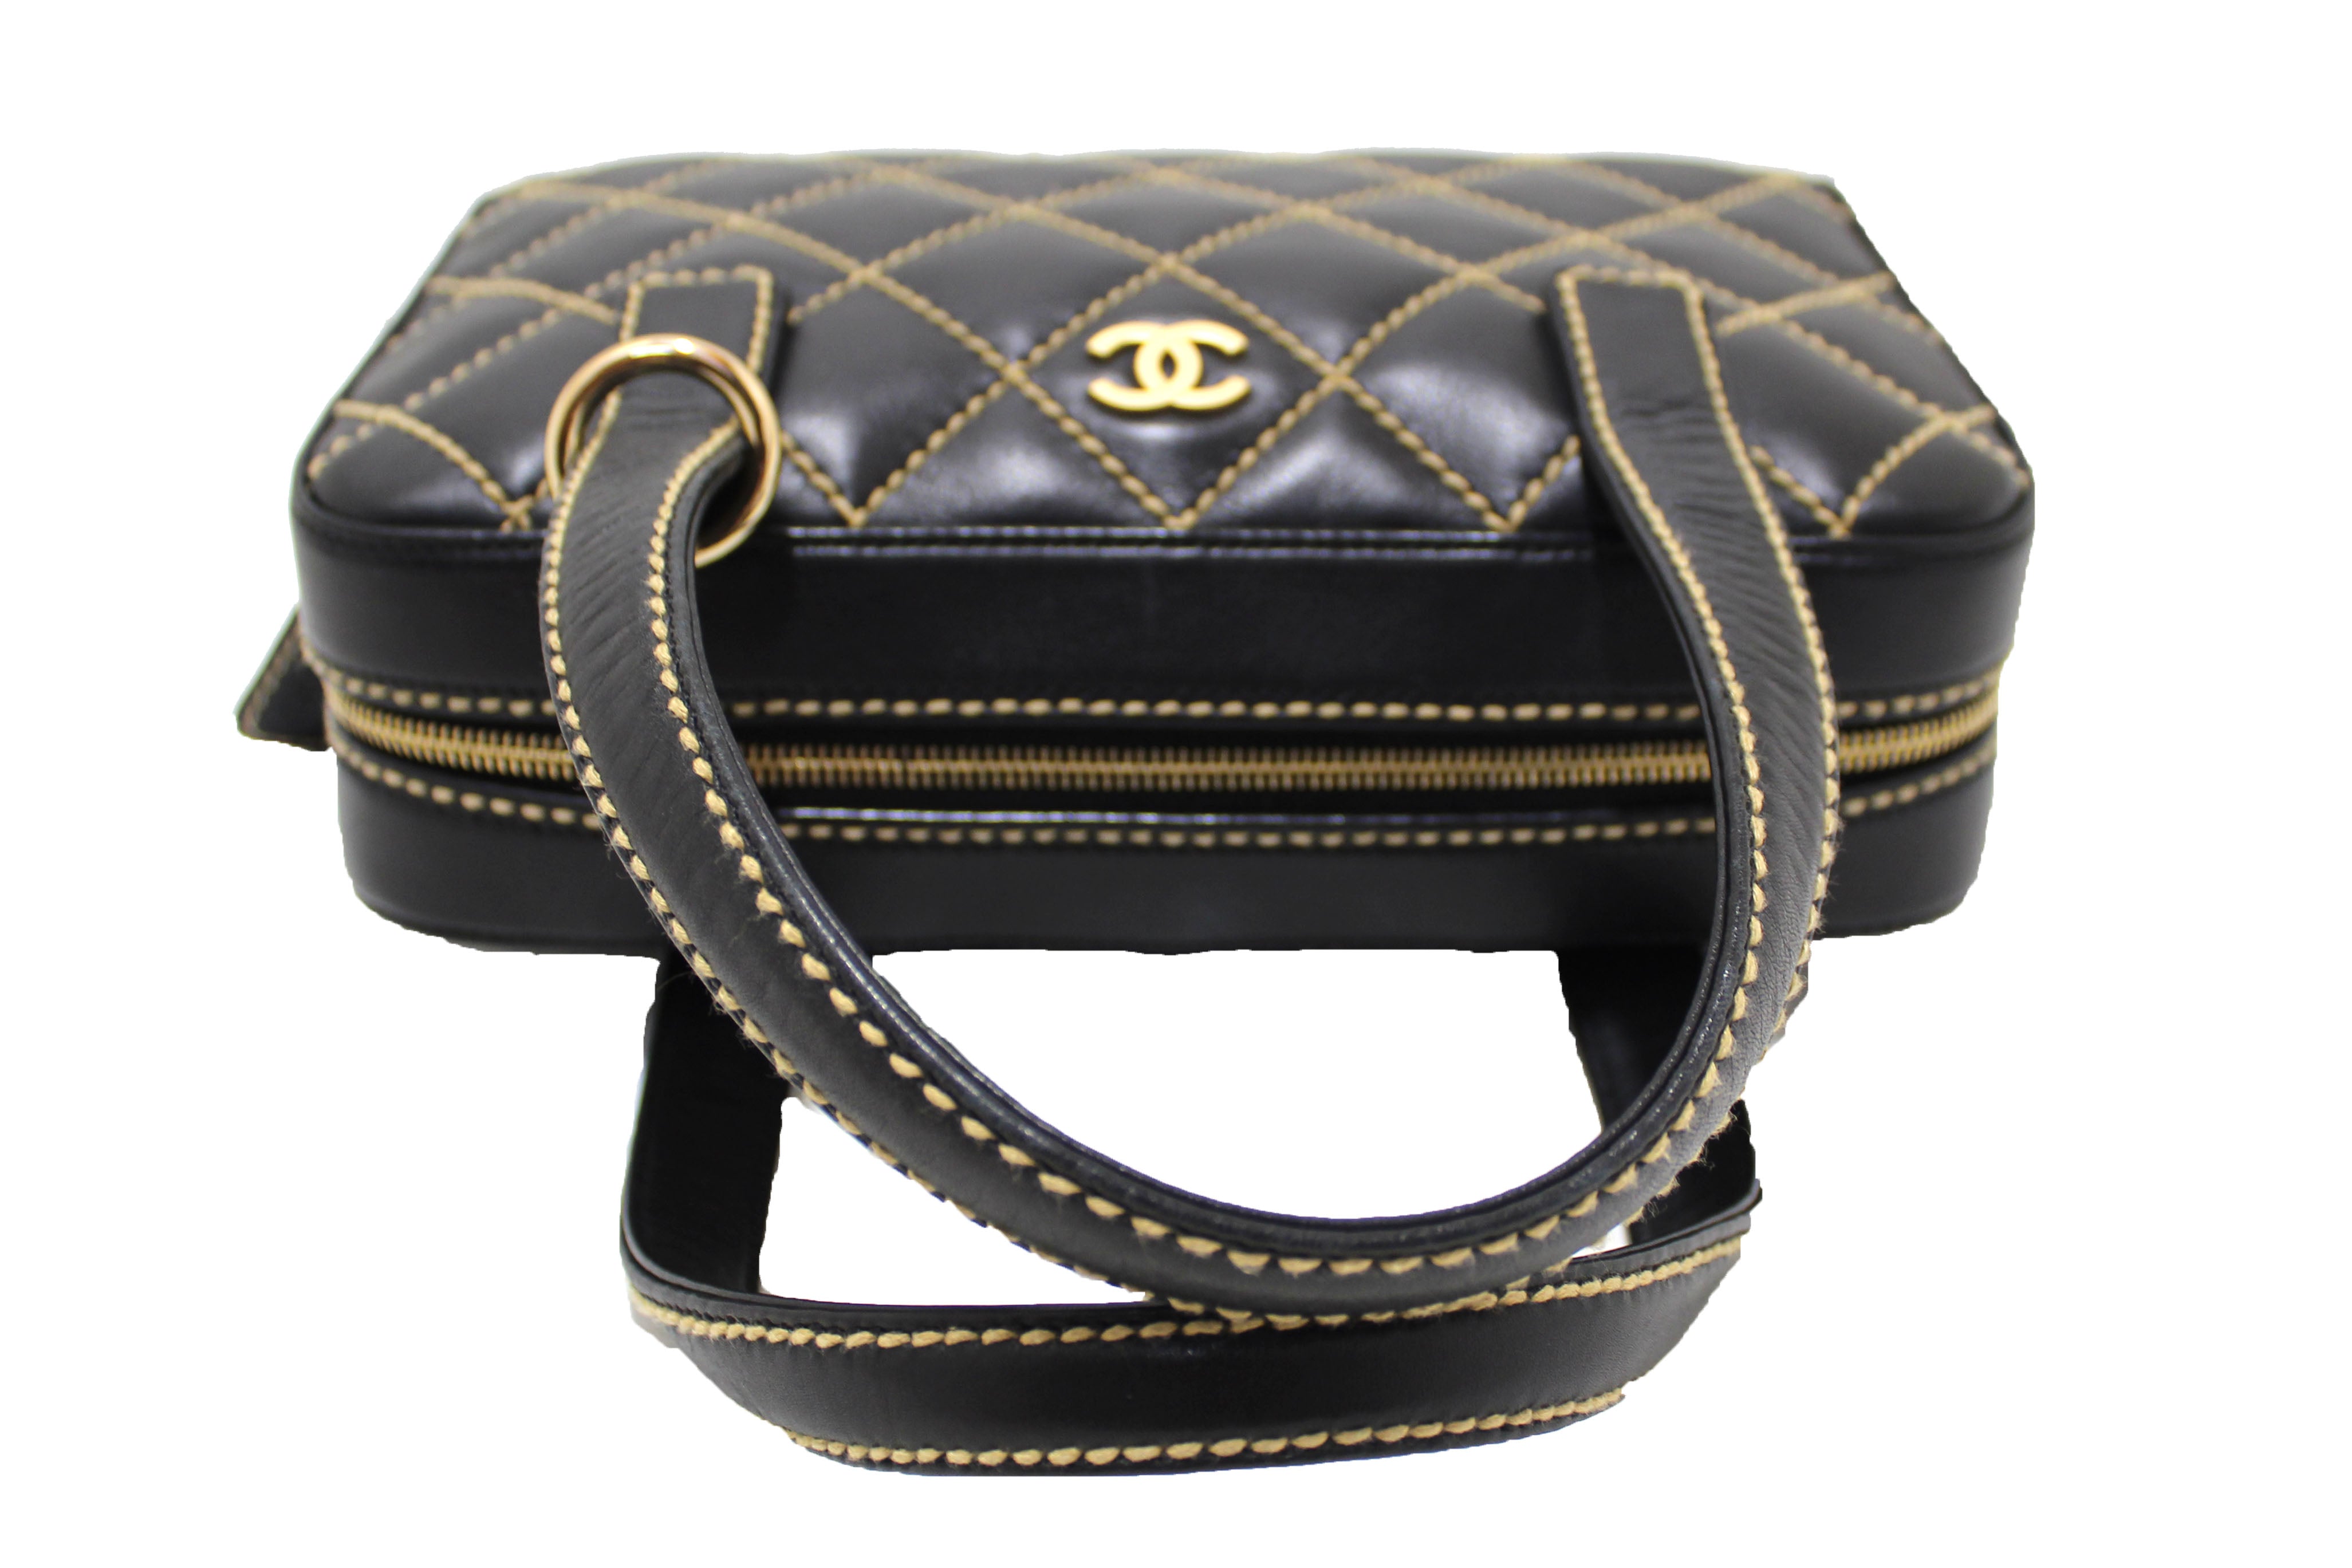 Chanel Pink Wild Stitch Leather Small Flap Top Handle Bag Chanel